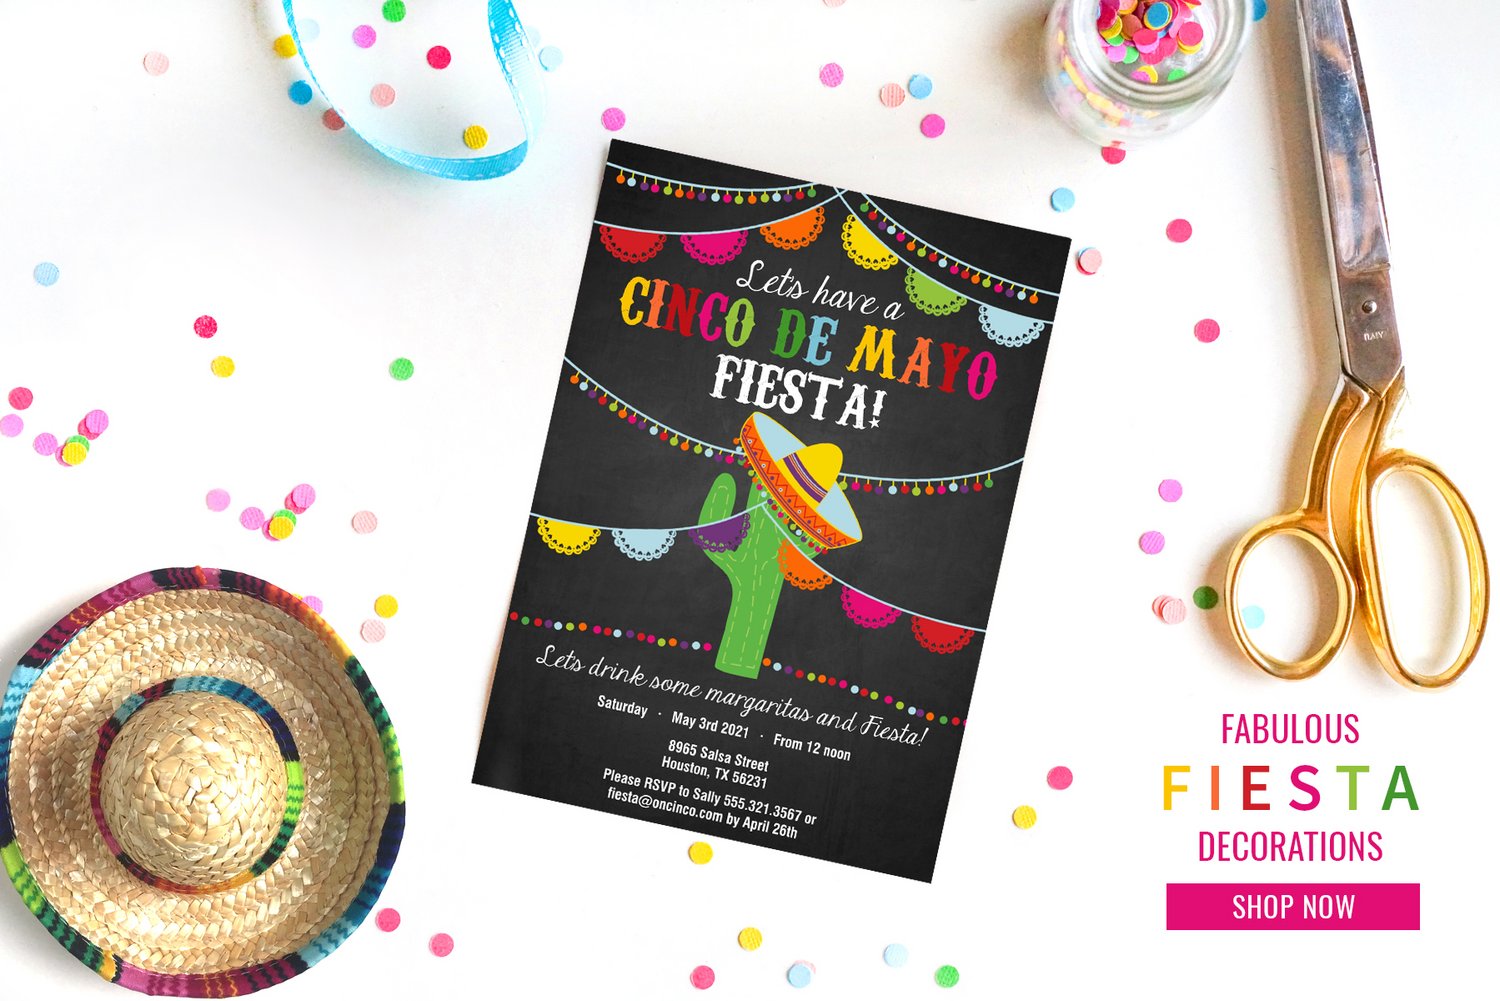 GET ALL FIESTA GIFTS, Printables and more!